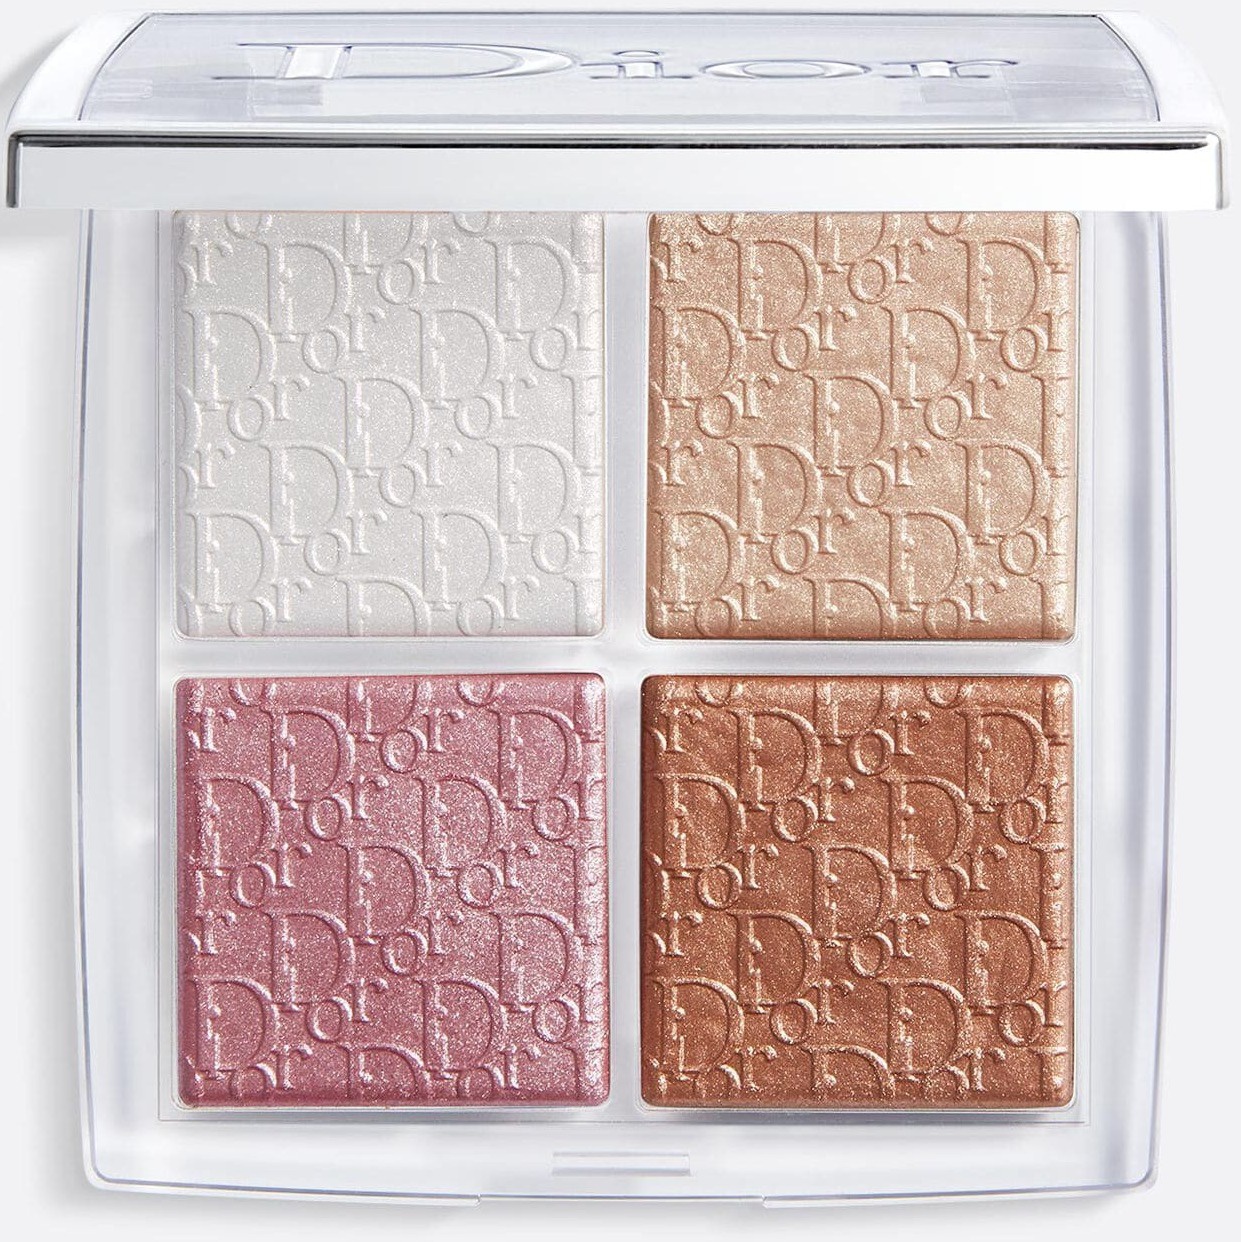 Dior Backstage Glow Face Palette - Universal